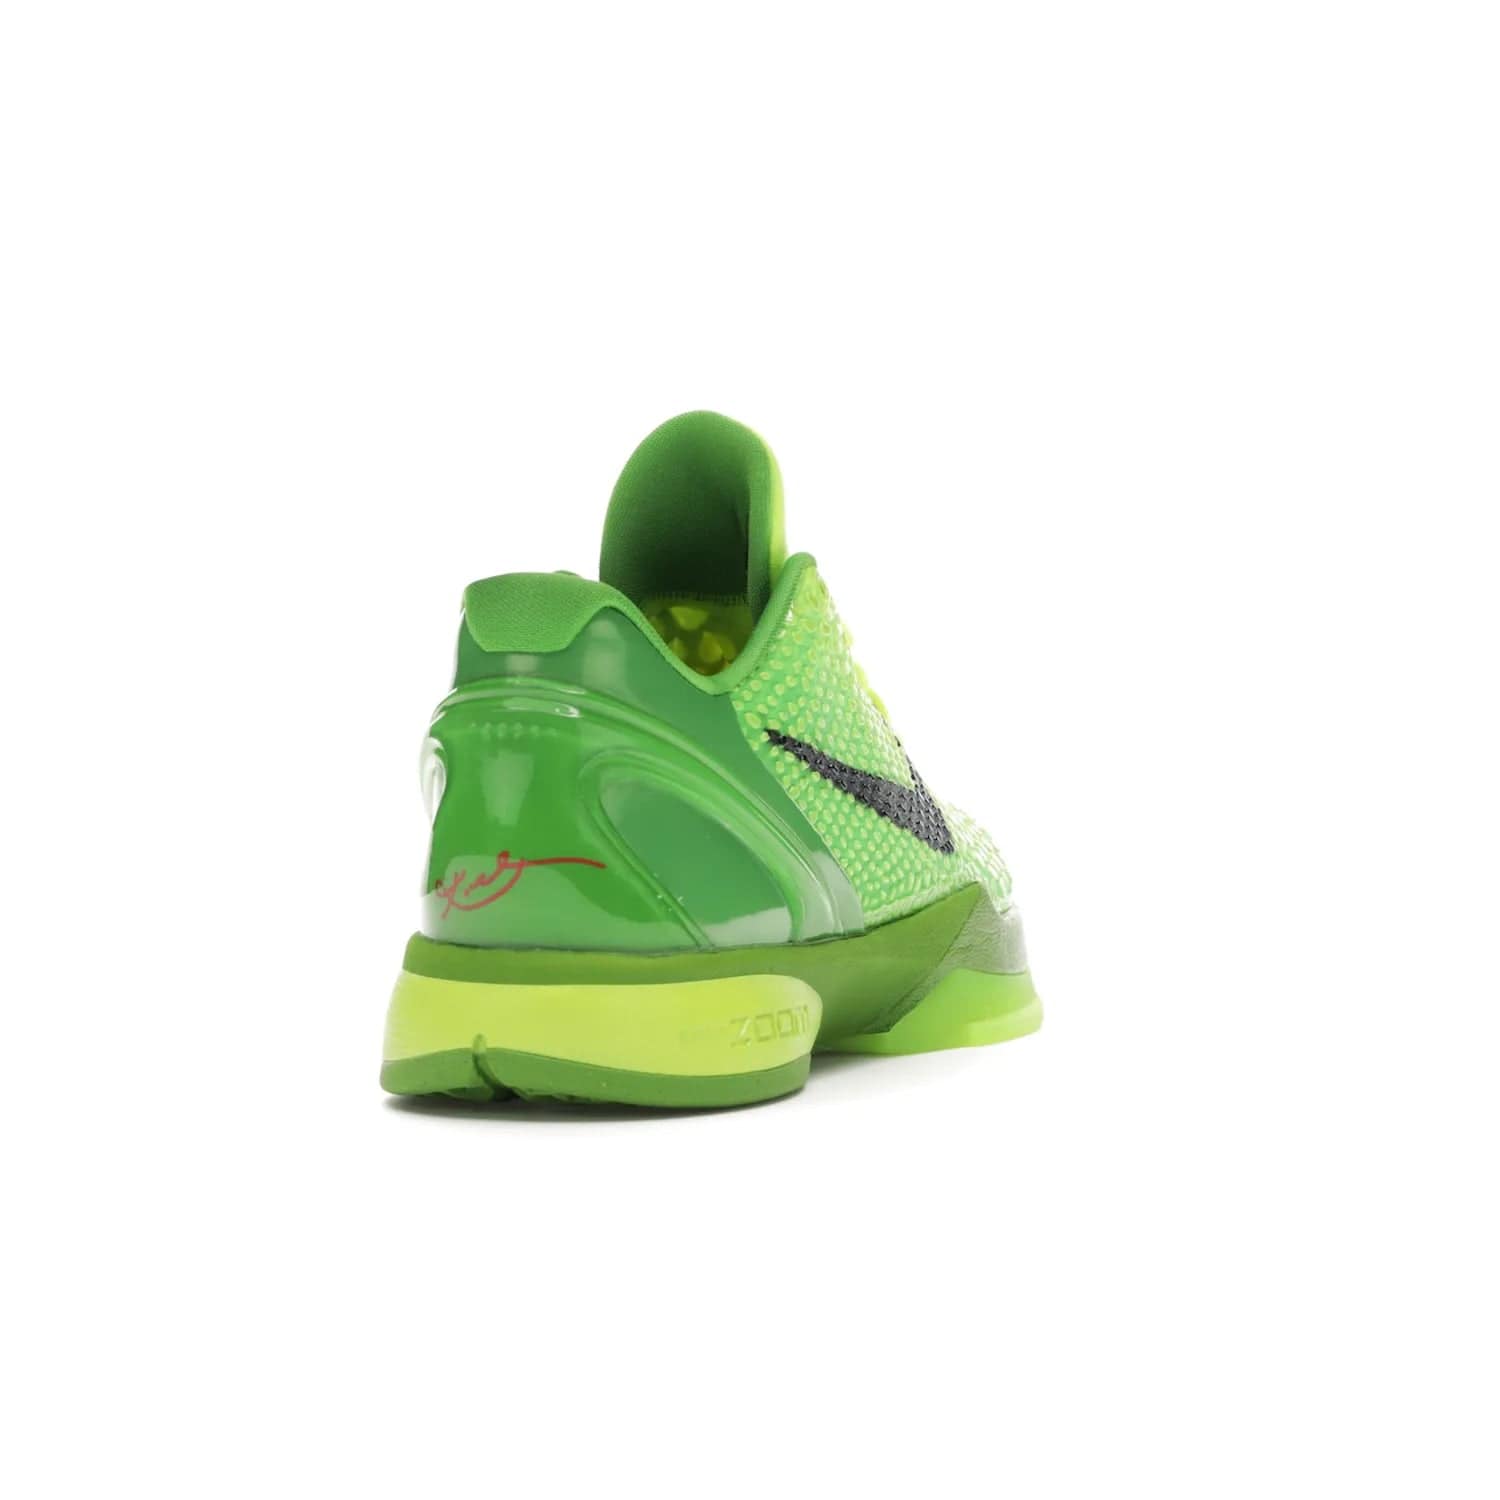 Nike Kobe 6 Protro Grinch (2020) - Image 30 - Only at www.BallersClubKickz.com - #
The Nike Kobe 6 Protro Grinch updates the iconic 2011 design with modern tech like a Zoom Air cushioning system, scaled-down traction, and updated silhouette. Experience the textured Green Apple and Volt upper plus bright red and green accents for $180.